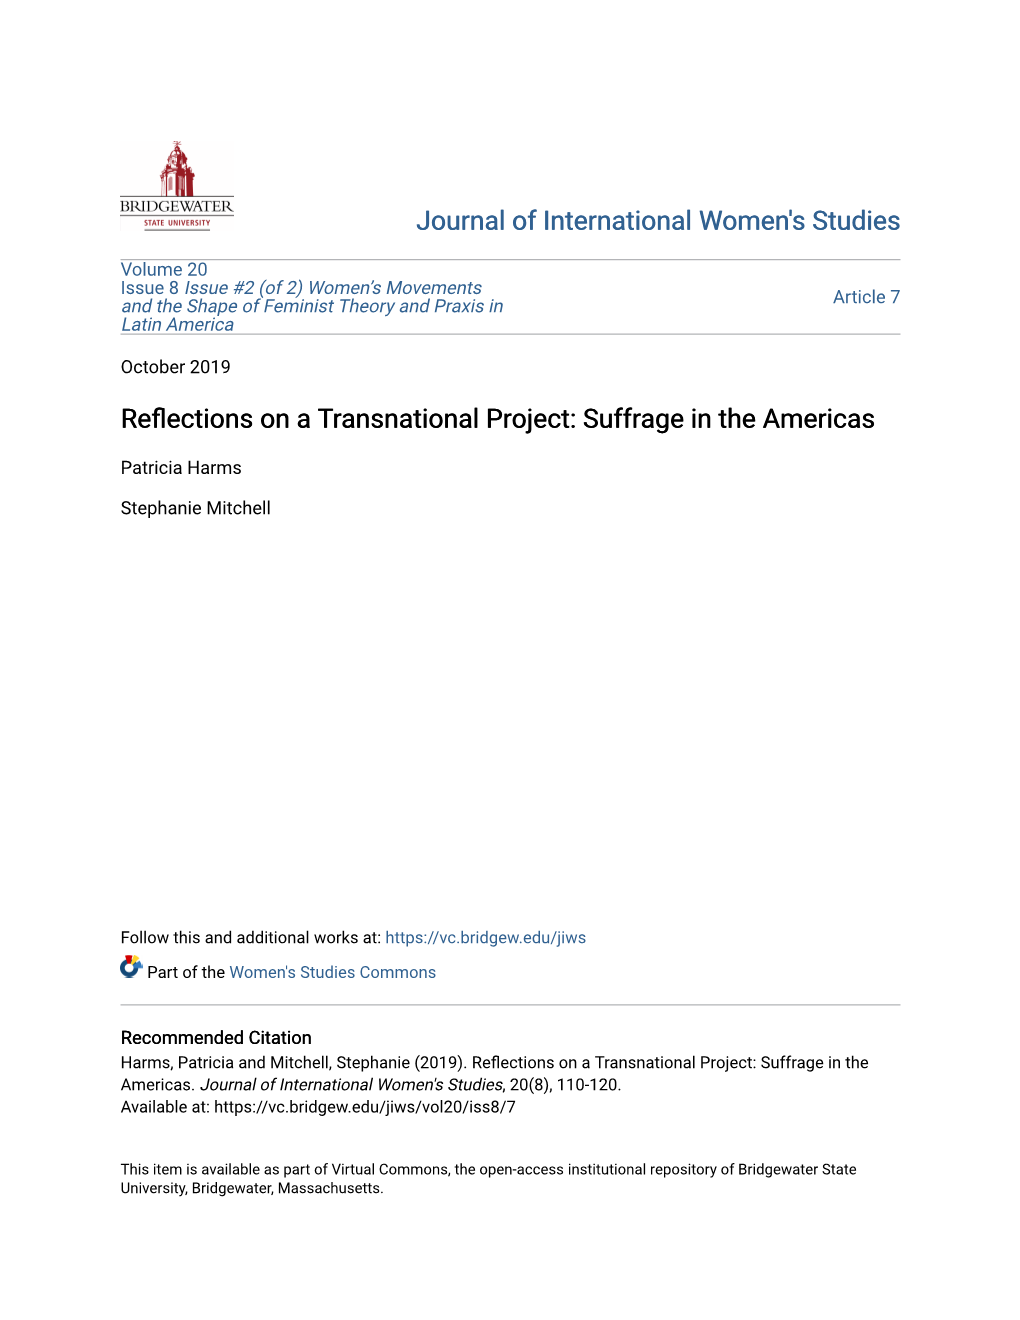 Reflections on a Transnational Project: Suffrage in the Americas